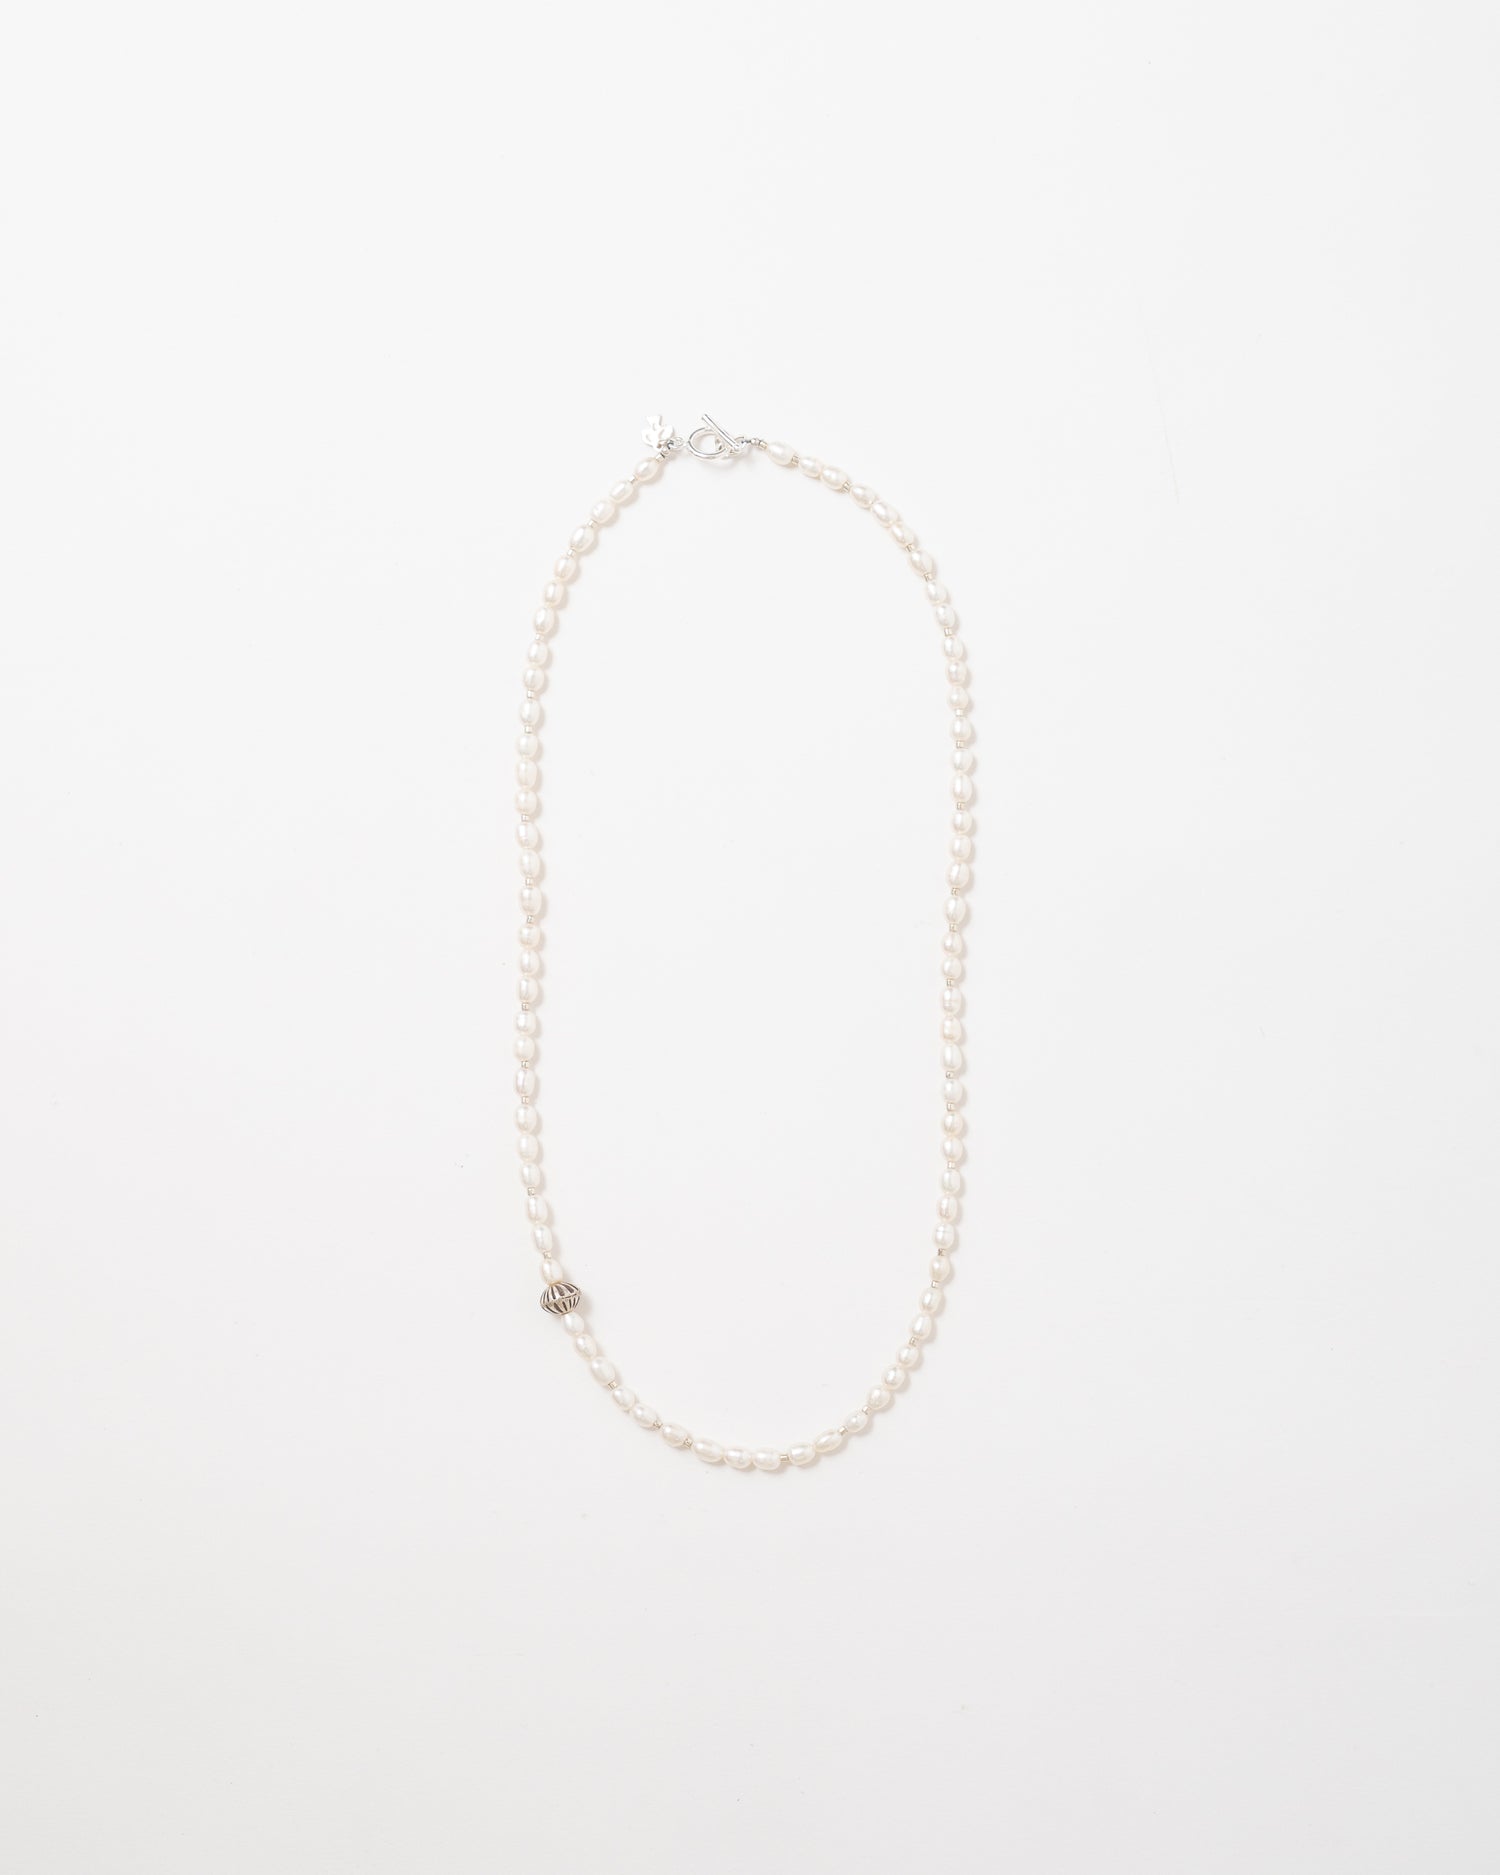 Freshwater Pearl + Silver Necklace 18"